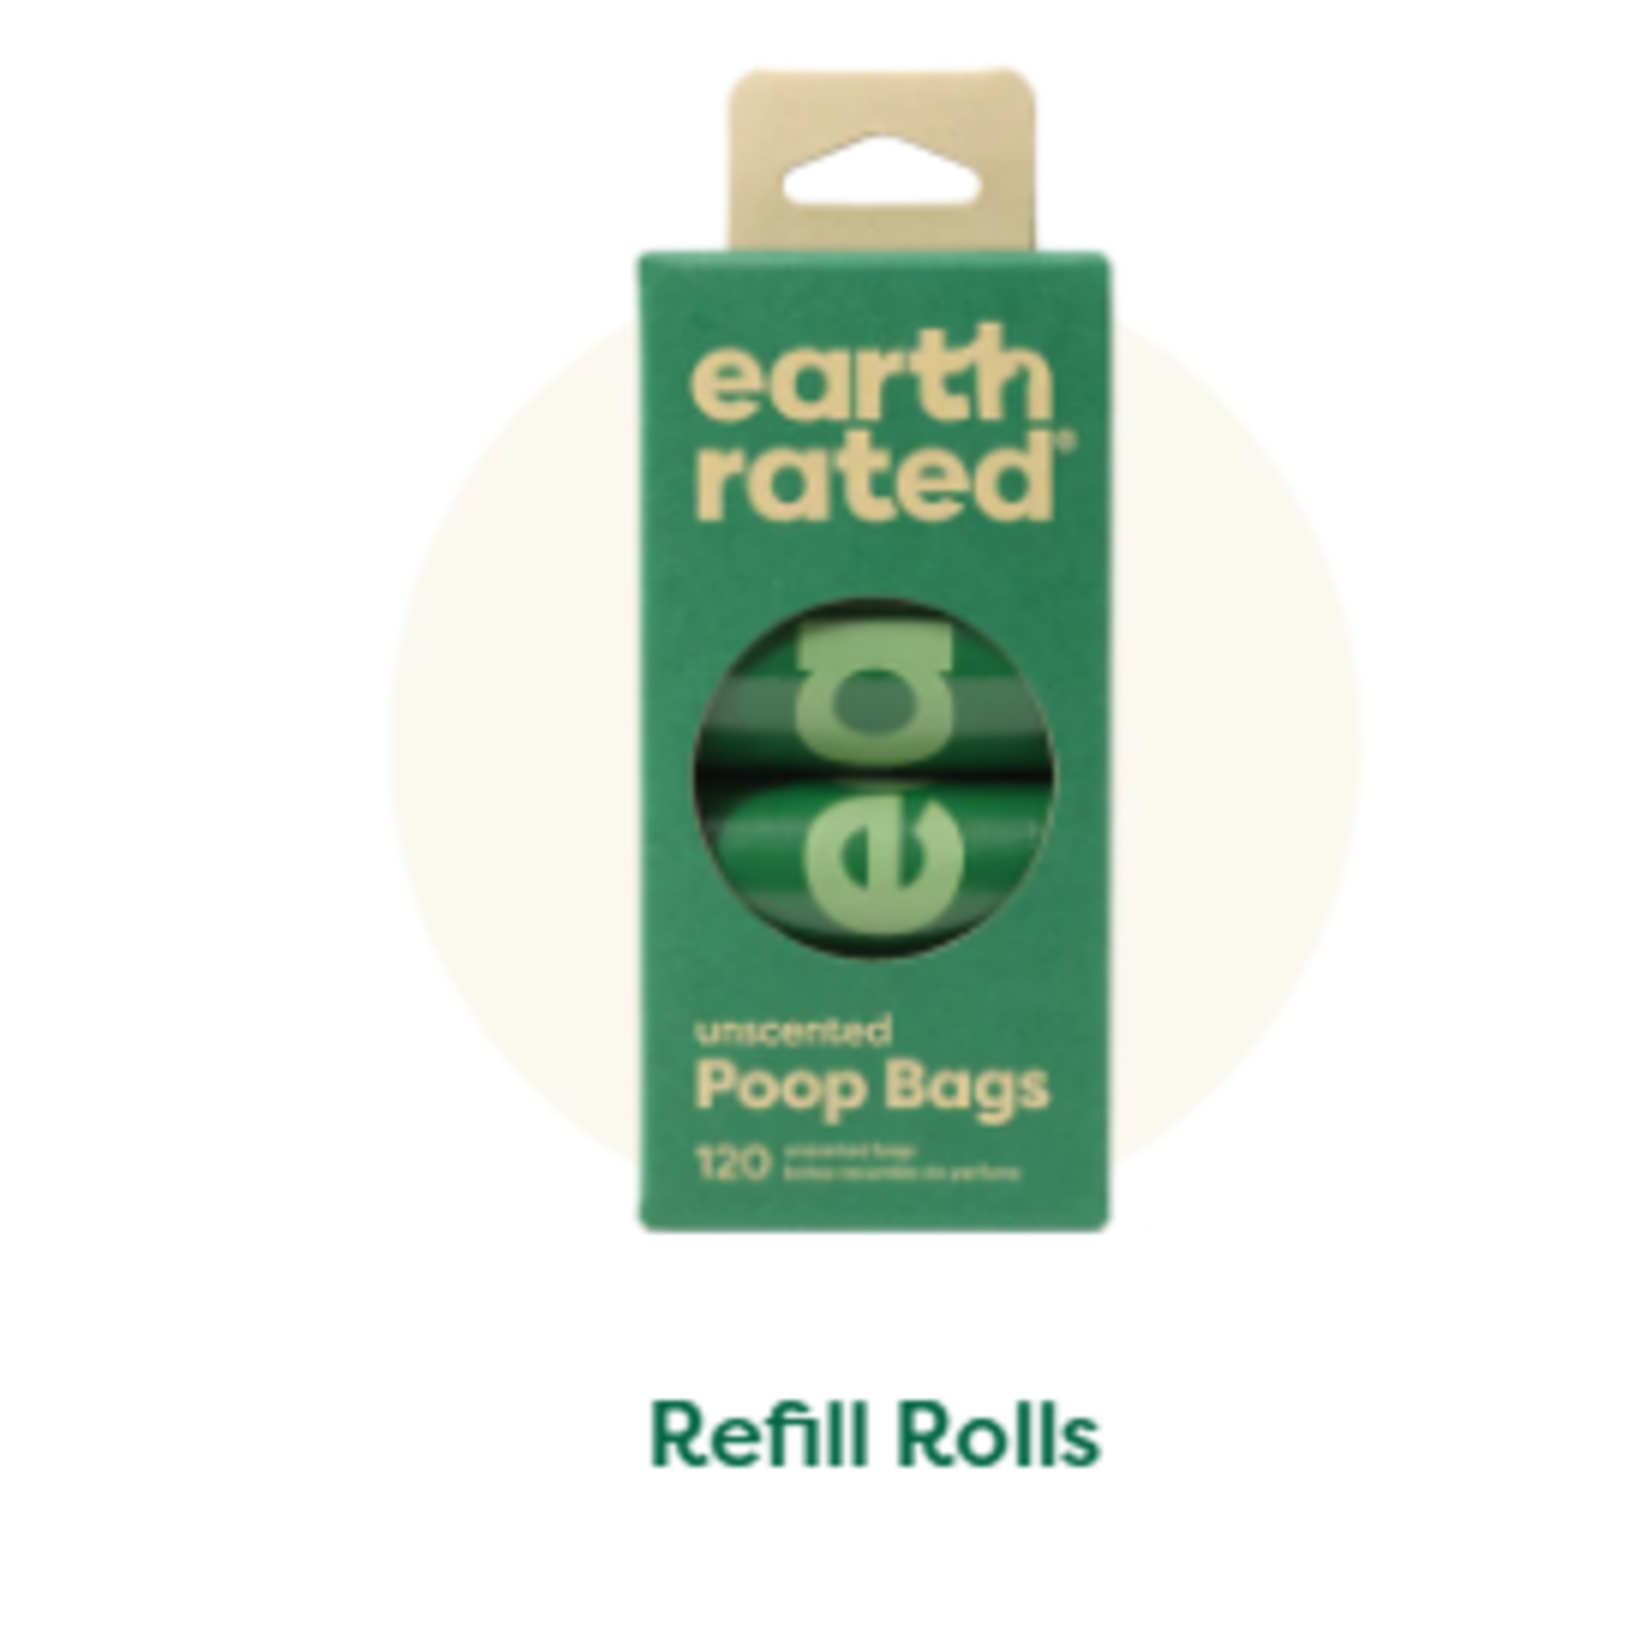 Earth Rated Certified Compostable Bags - 120 units